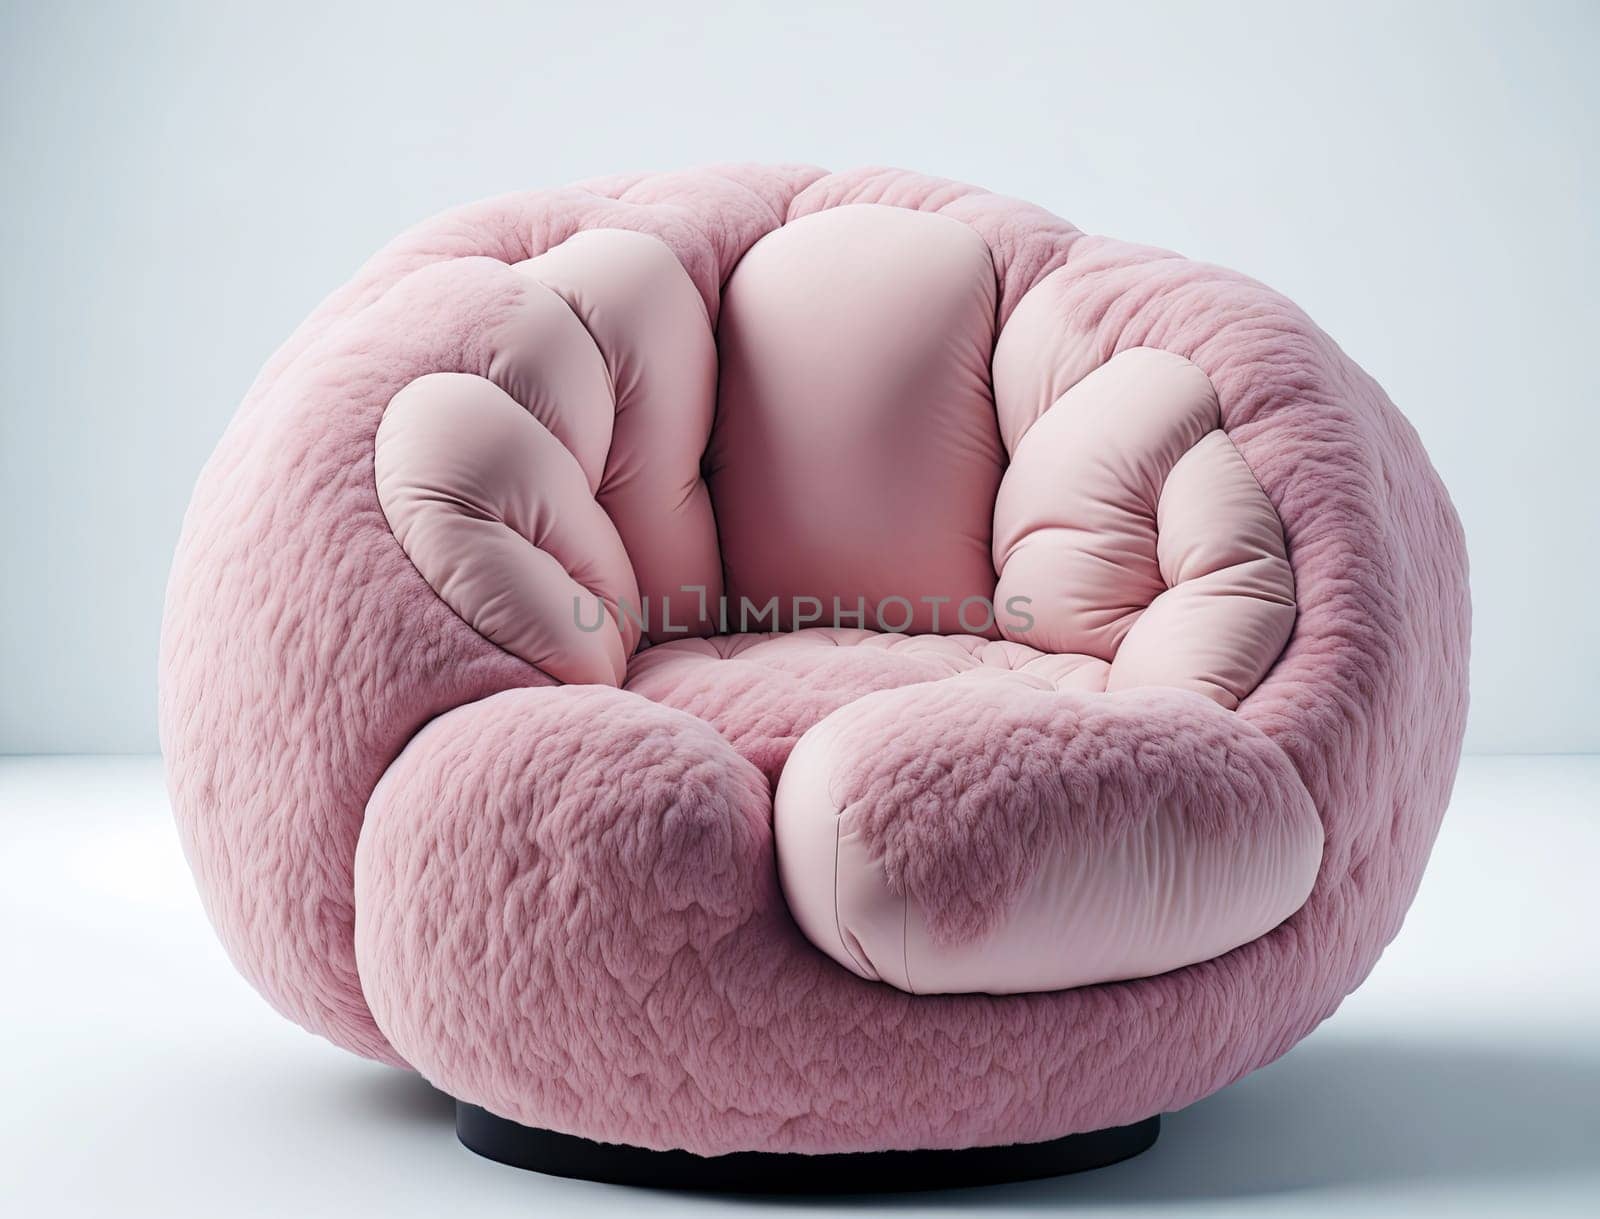 comfortable puffy armchair on white background by Ladouski